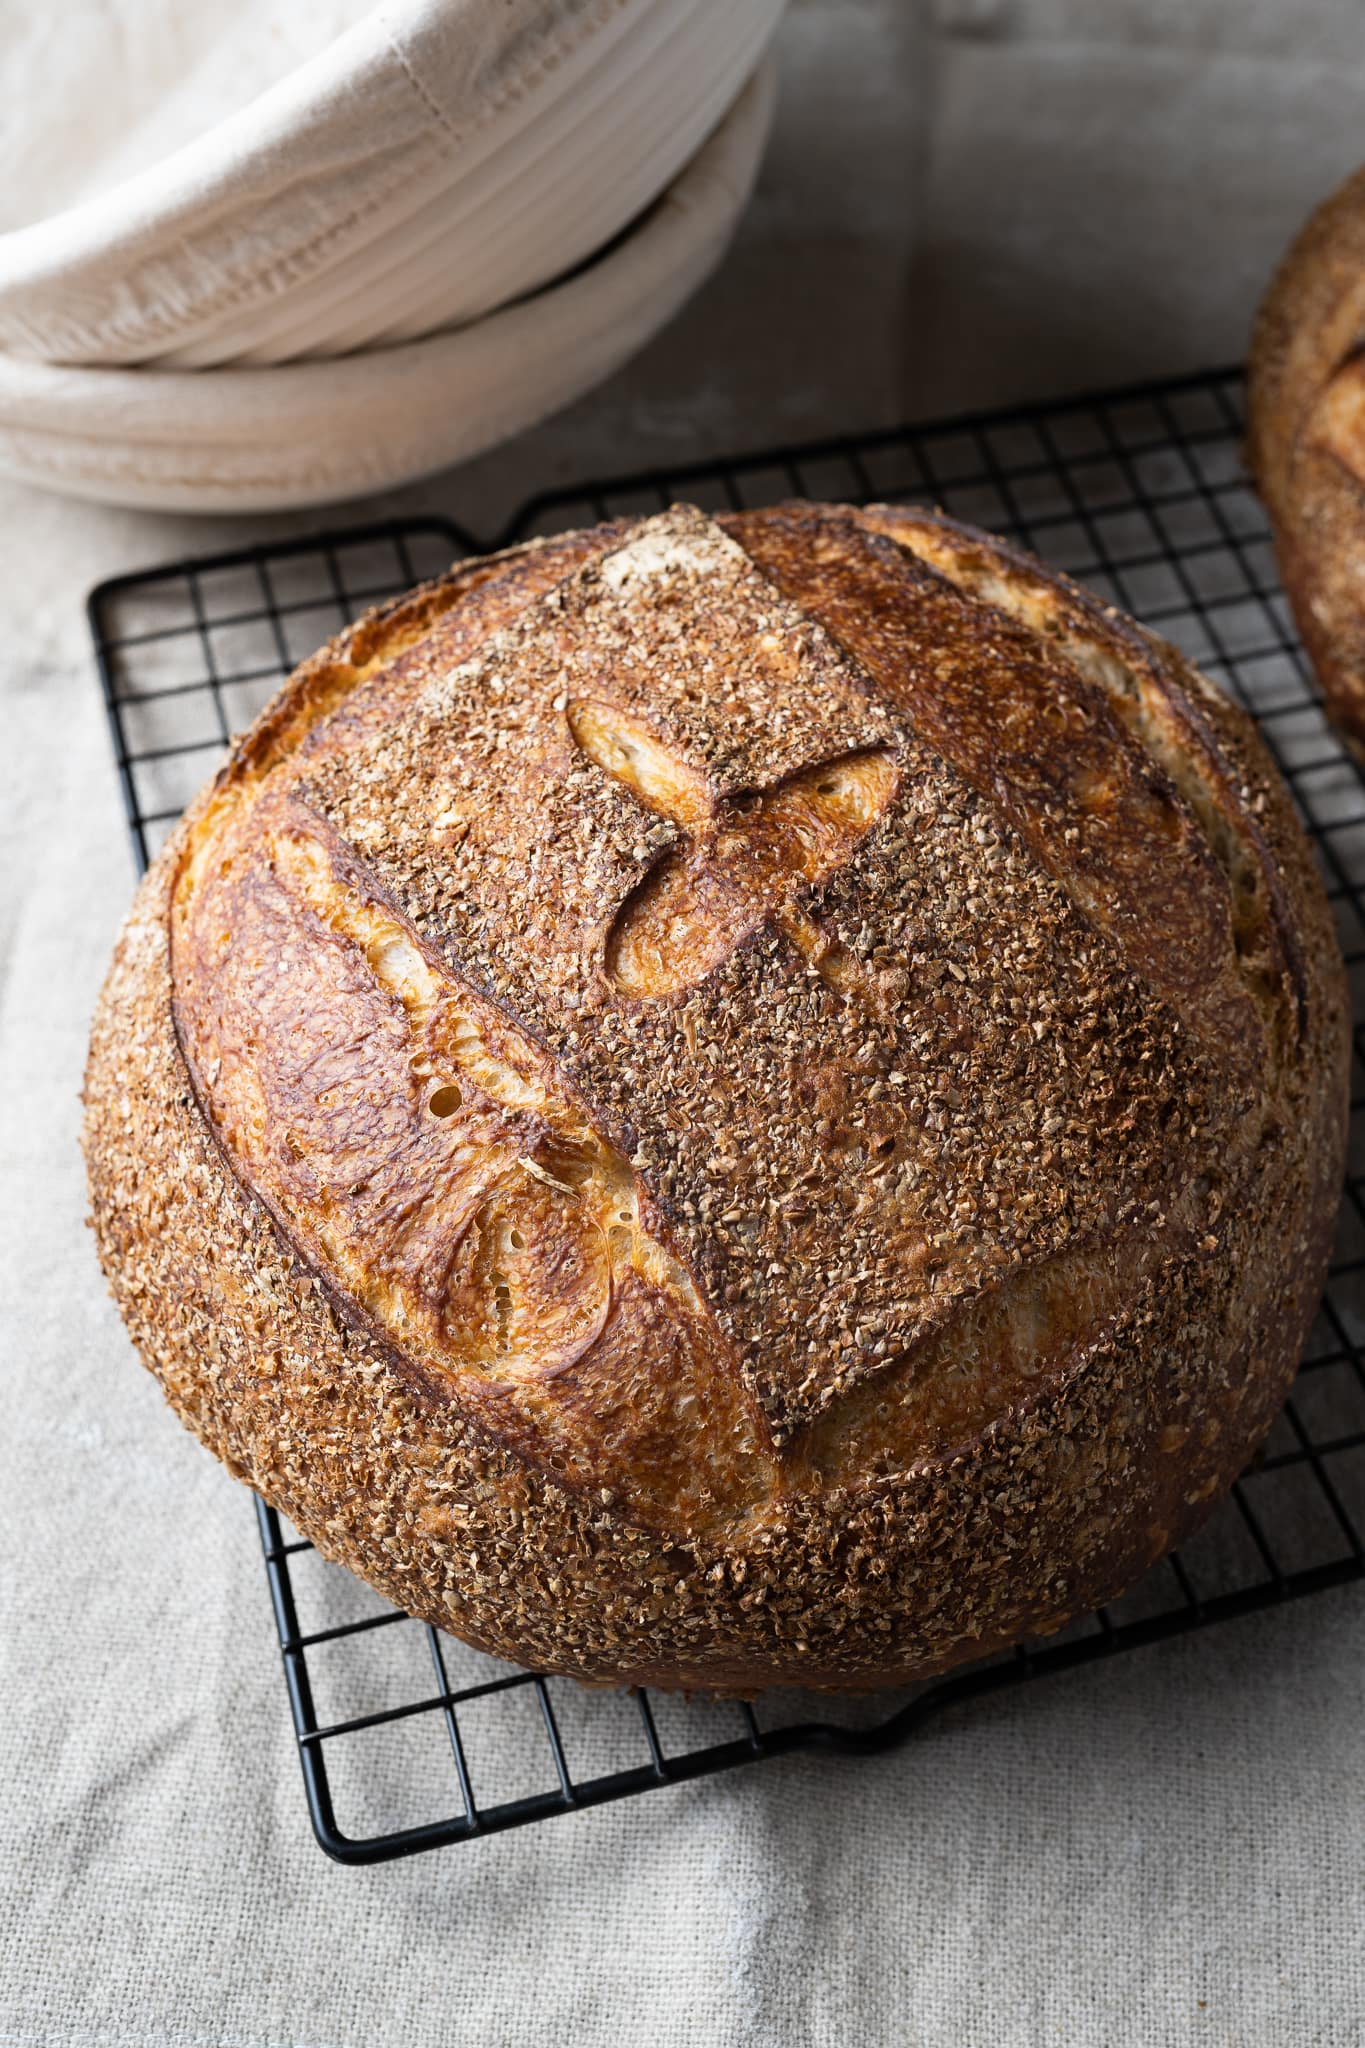 https://www.theperfectloaf.com/wp-content/uploads/2021/07/theperfectloaf-no-knead-sourdough-bread-2-1.jpg